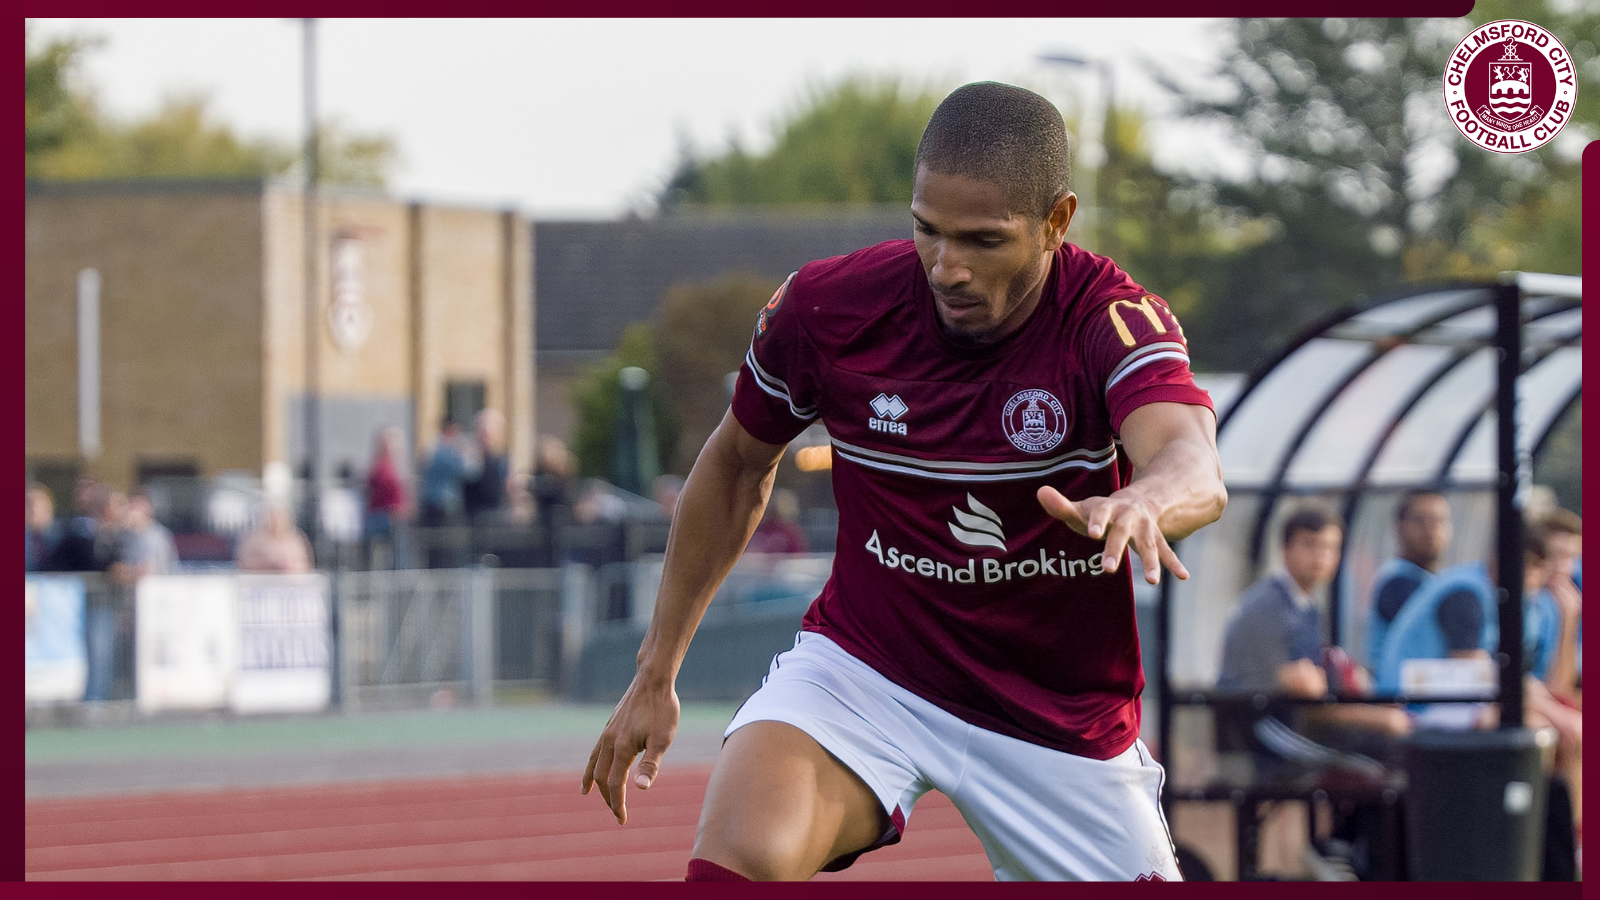 SIMEON JACKSON STEPS BACK FROM PLAYING – Chelmsford City FC